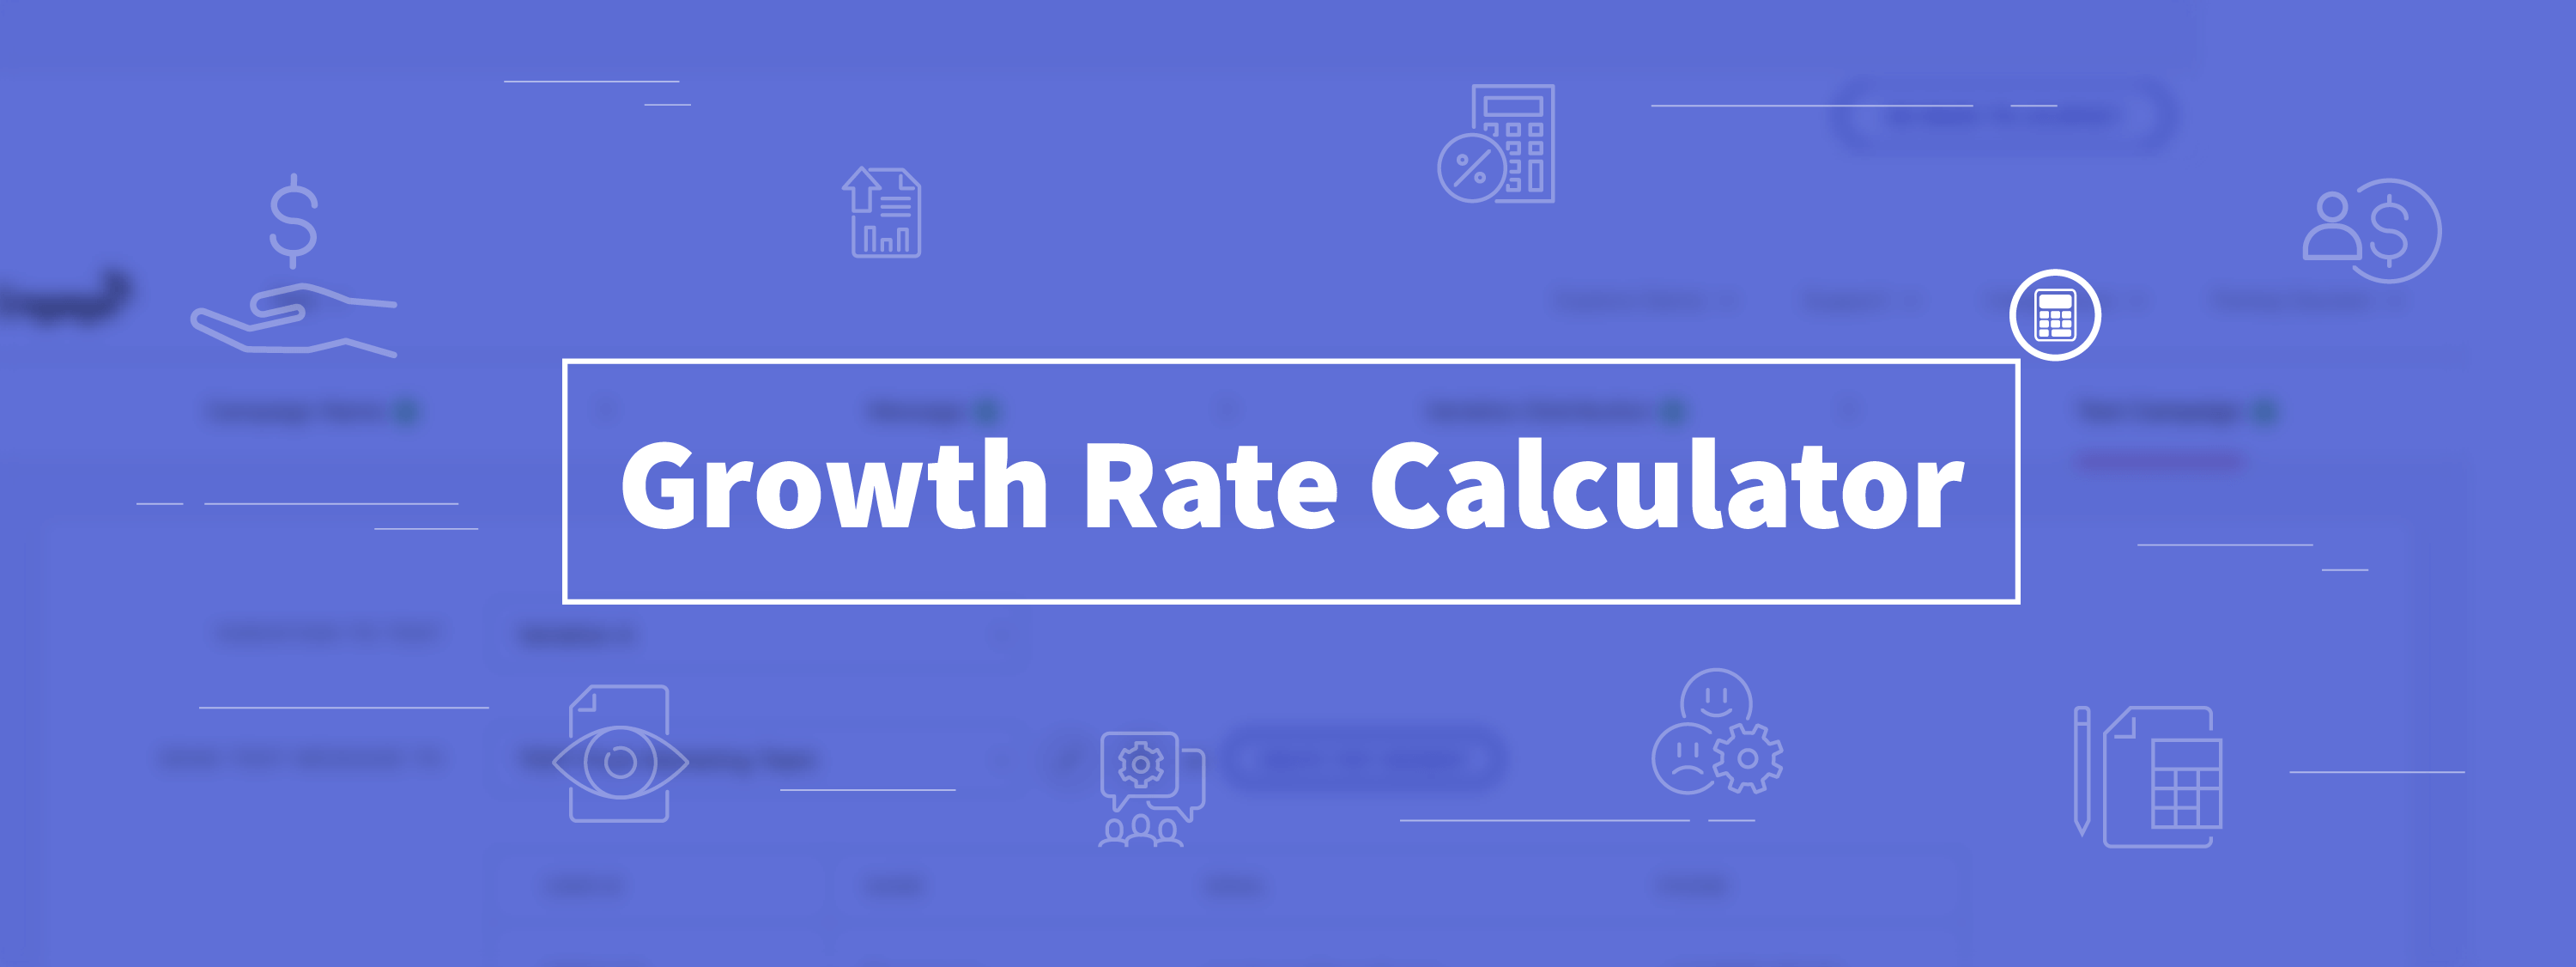 Growth Rate Calculator